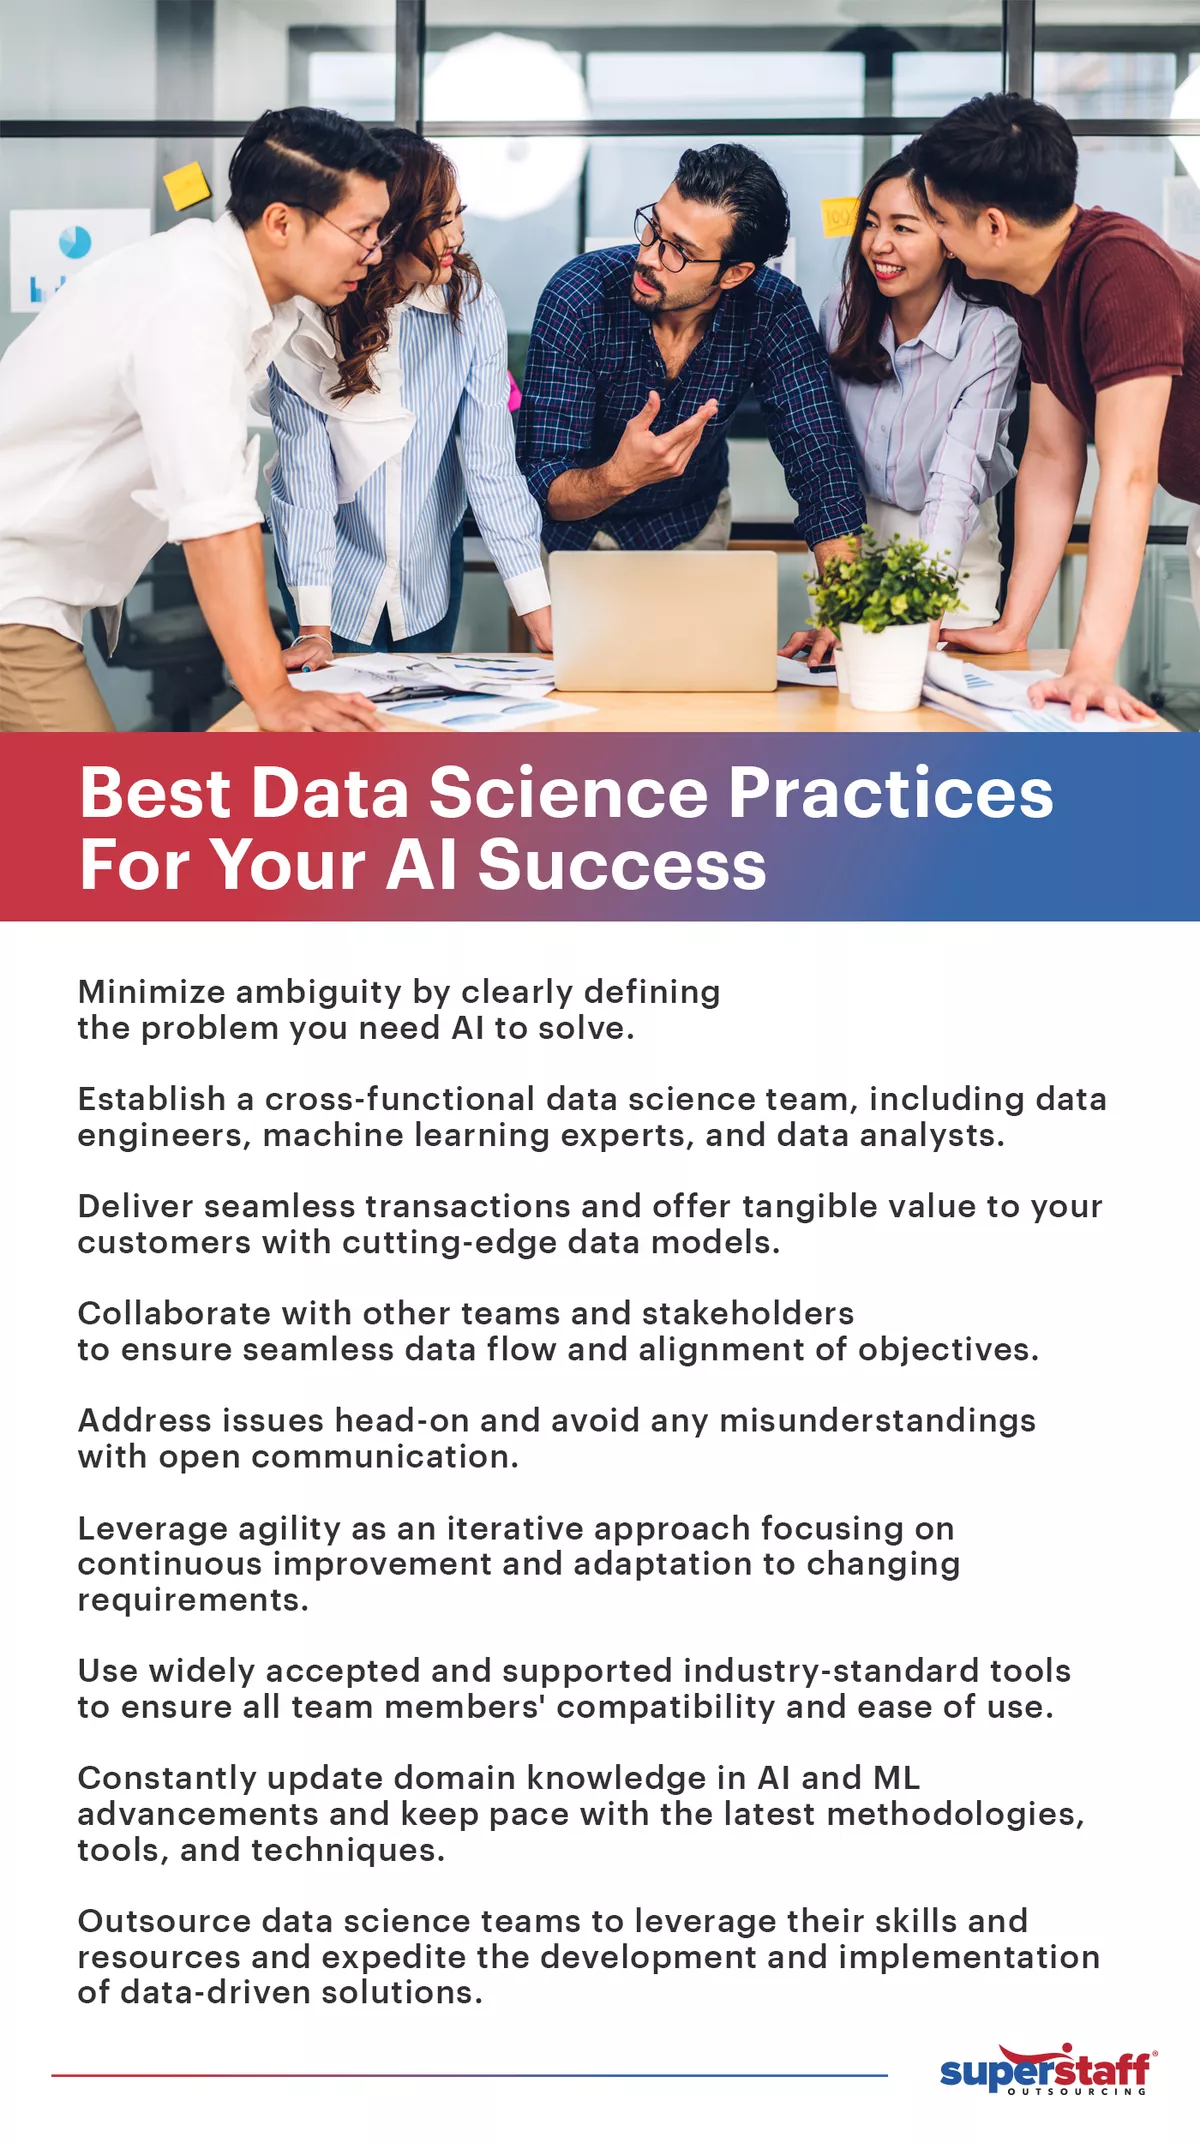 An infographic that discusses the most strategic data scientist practices that can drive your success.